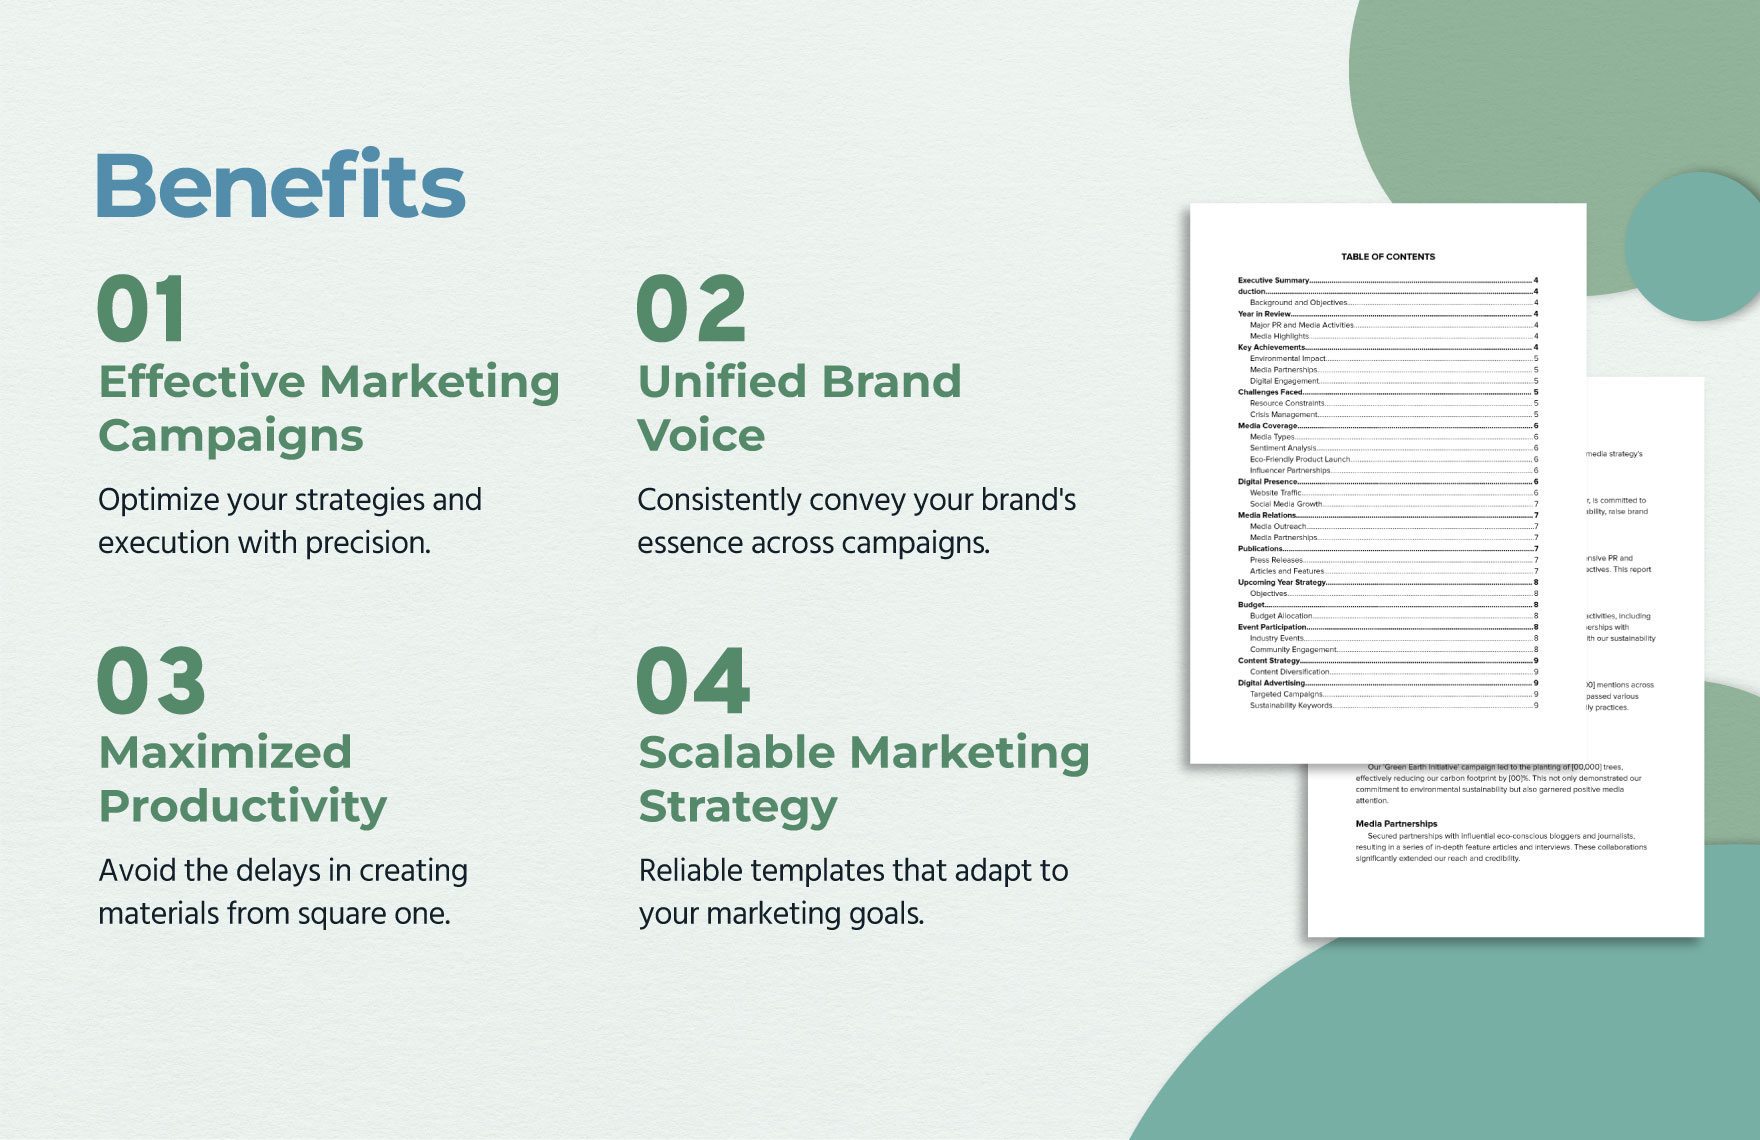 Marketing Yearly PR and Media Strategy Report Template